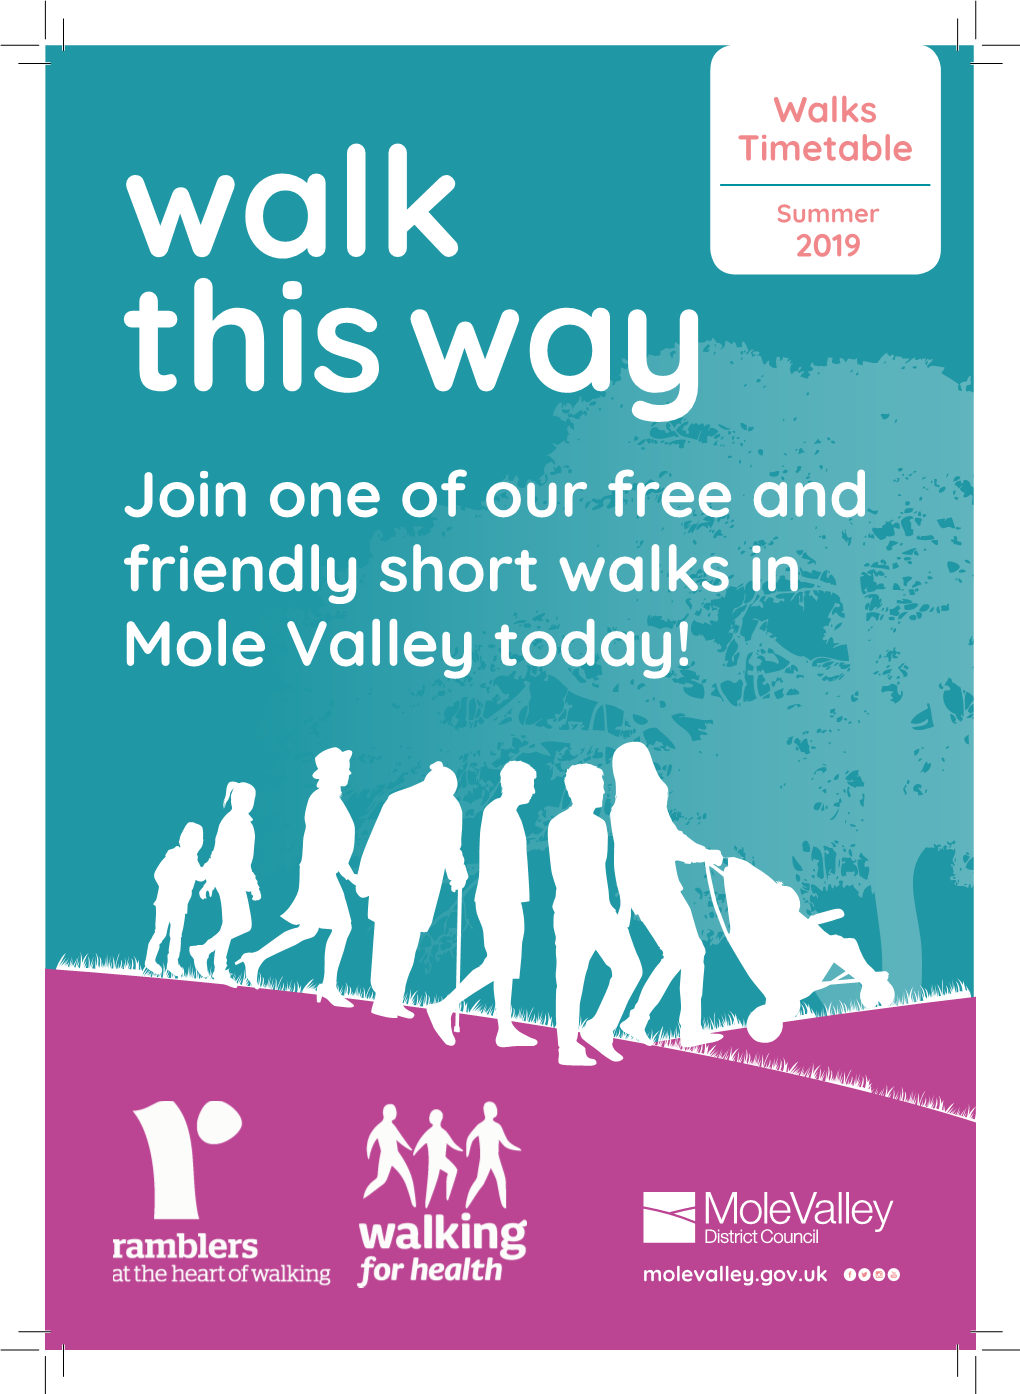 Join One of Our Free and Friendly Short Walks in Mole Valley Today!